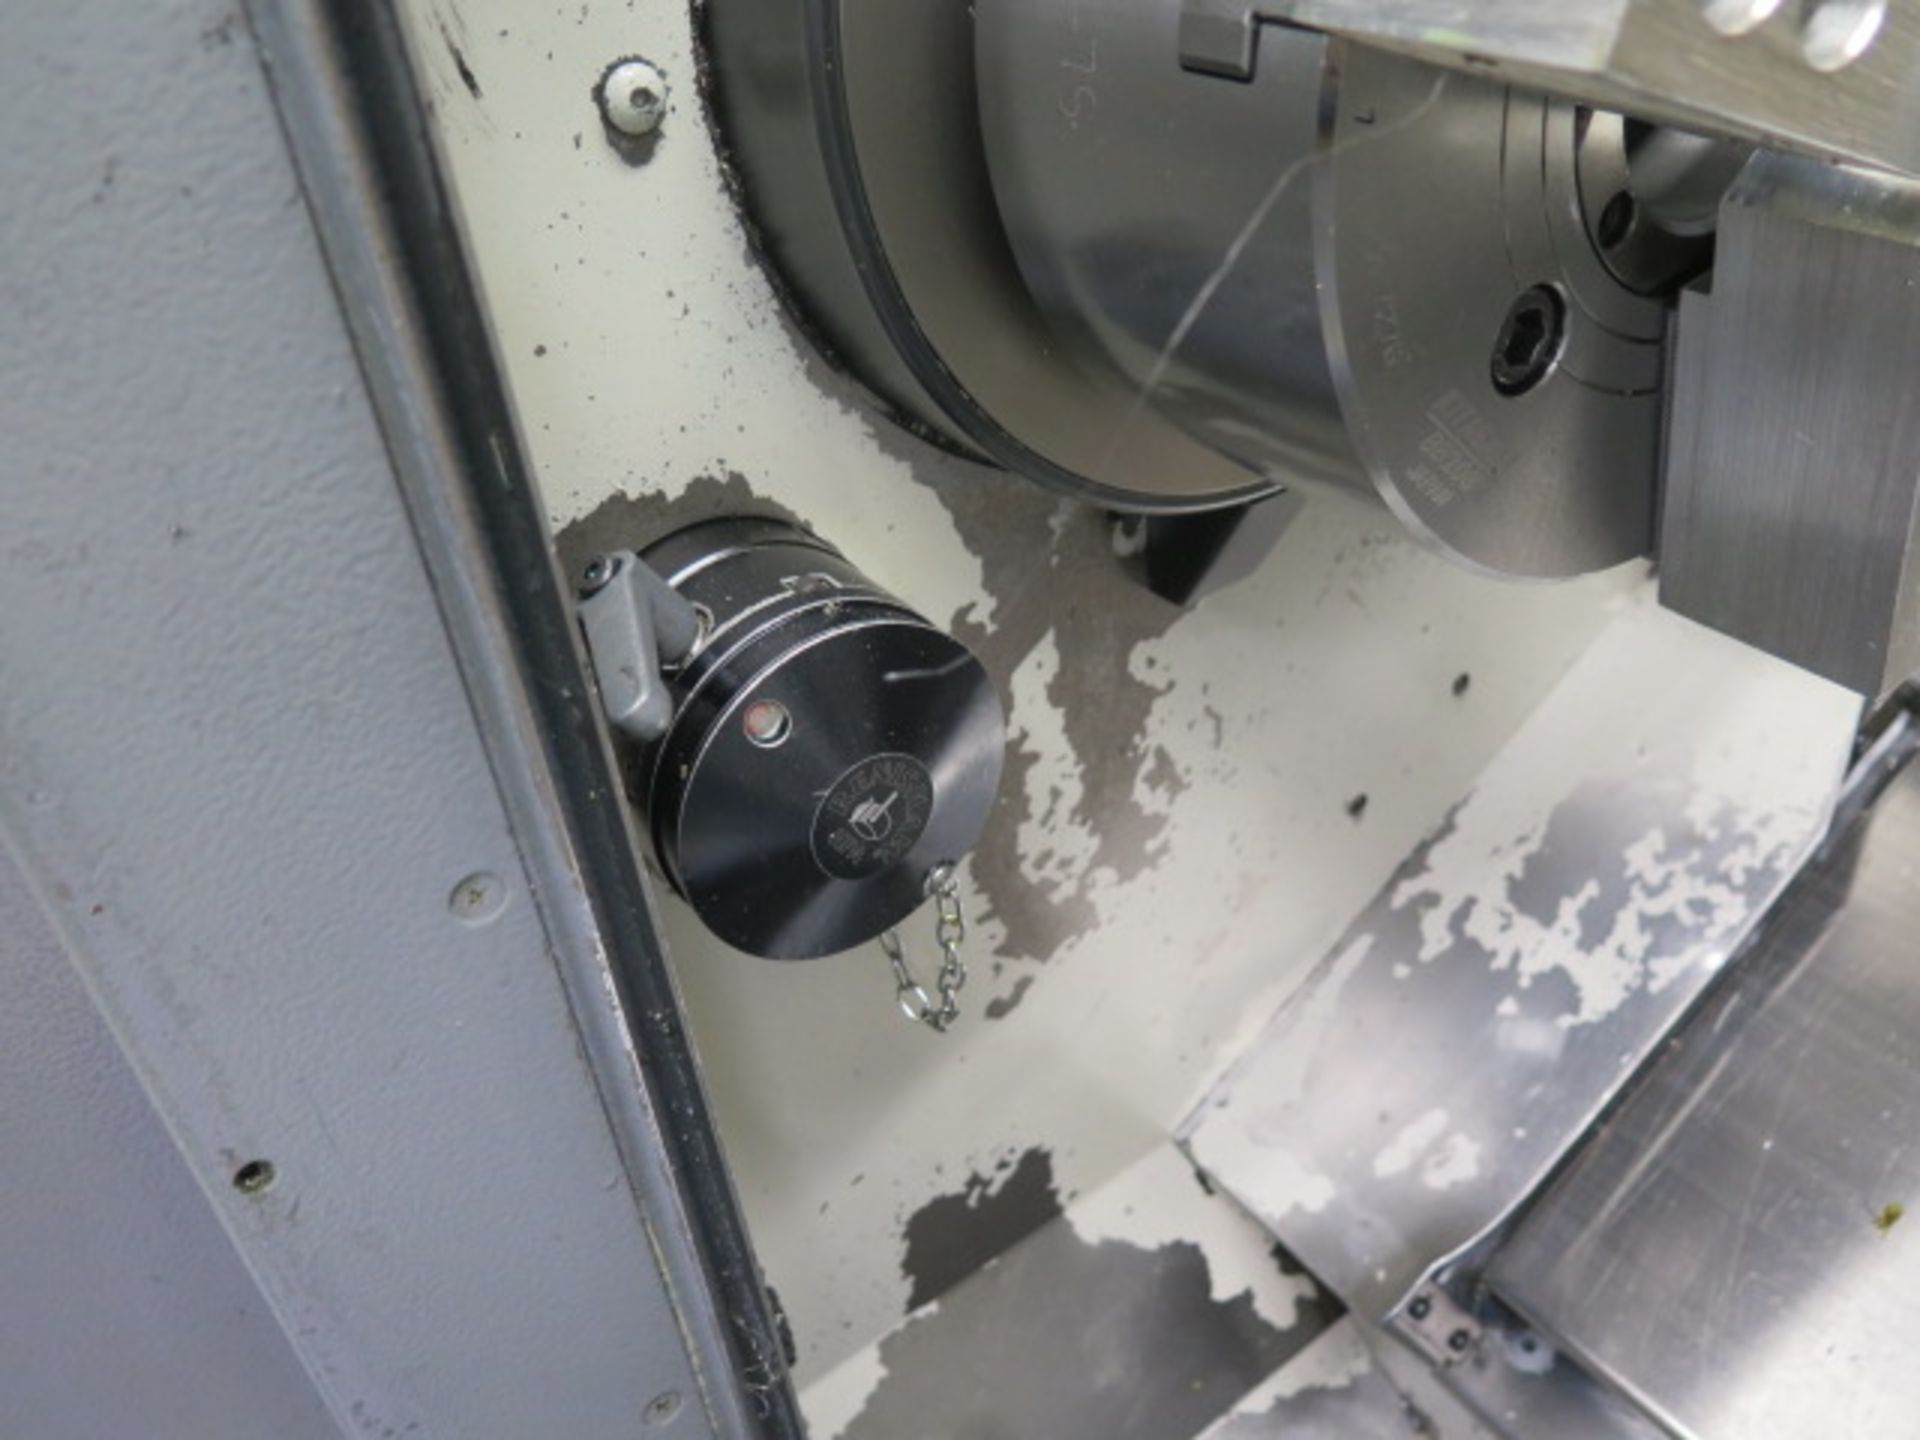 Mori Seiki SL-204S/500 Twin Spindle CNC Turning Center s/n SL200AE1390 Mori MSX-805 III, SOLD AS IS - Image 6 of 20